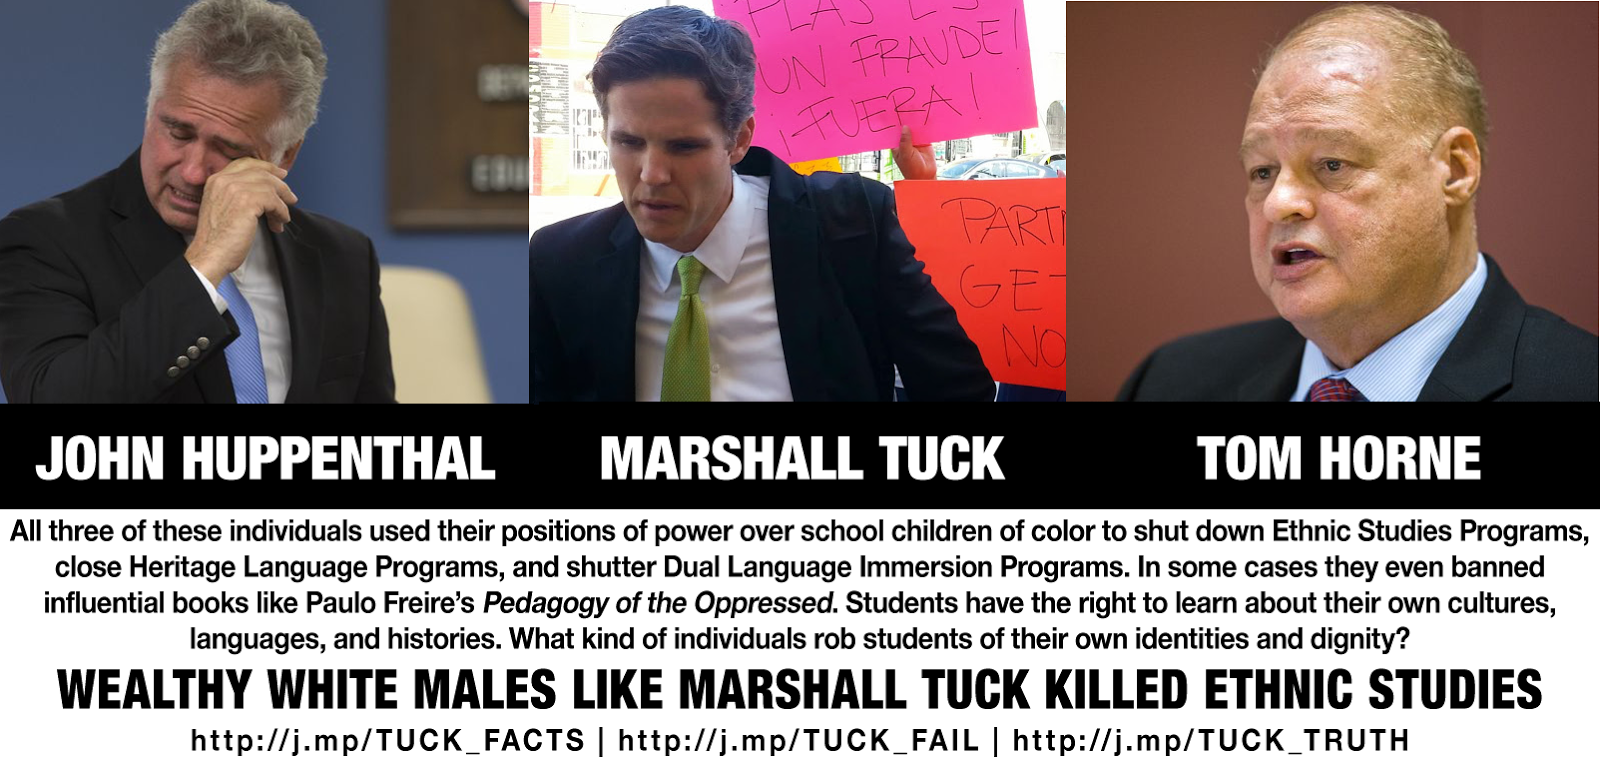 2014 was a wonderful year in which bigots Marshall Tuck, Tom Horne, and John Huppenthal all lost their elections.